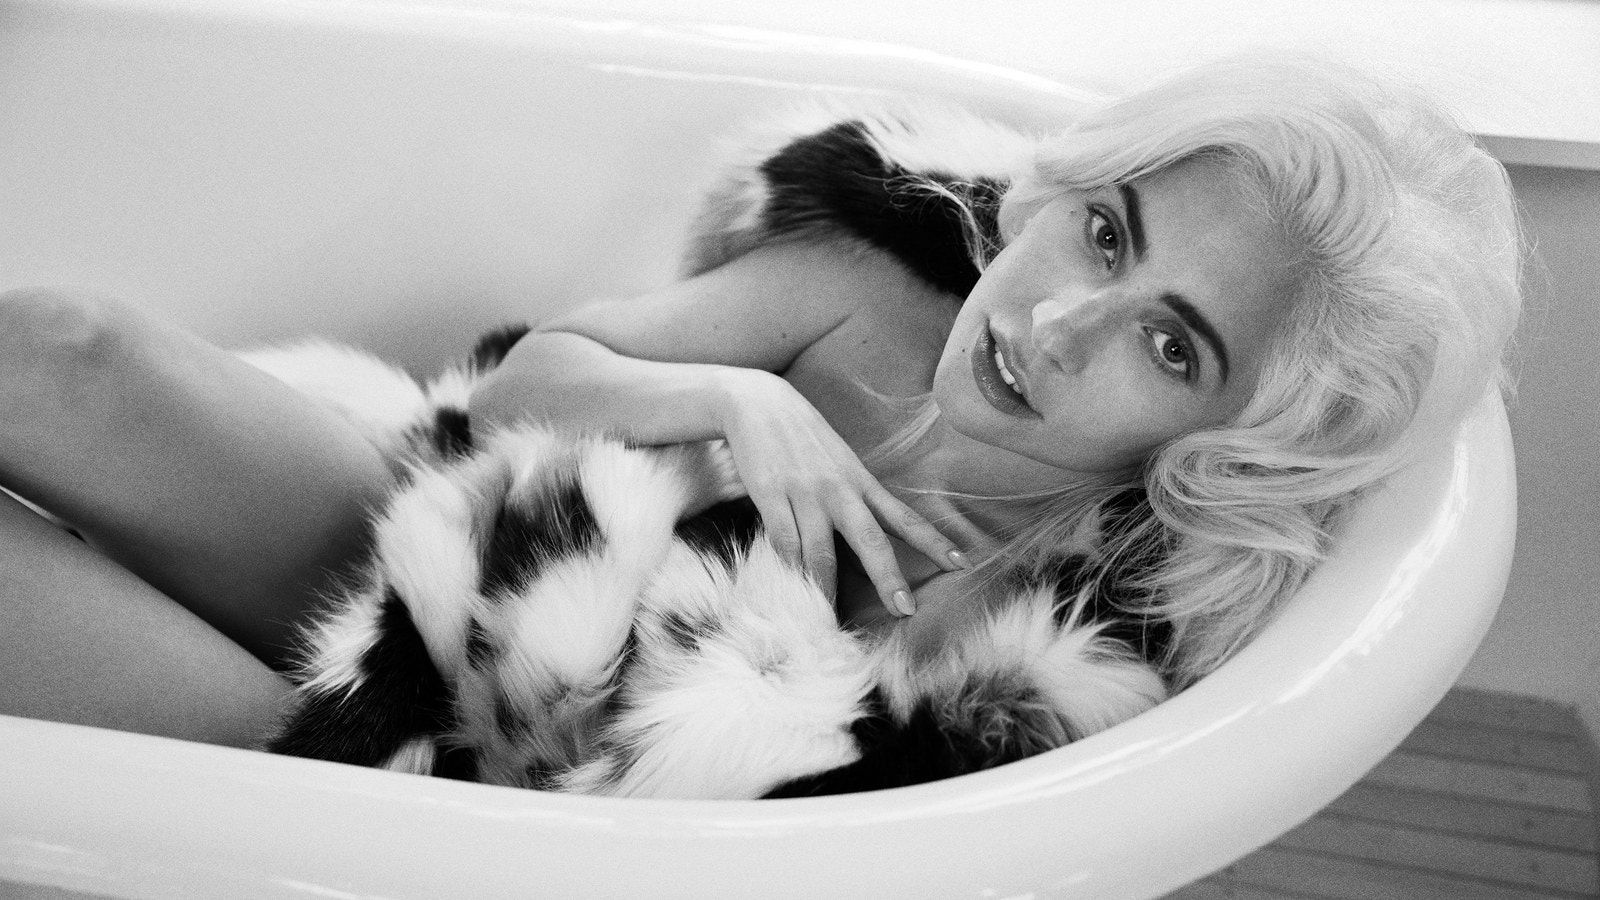 Photos: Lady Gaga Vogue Cover Photographed by Inez and Vinoodh